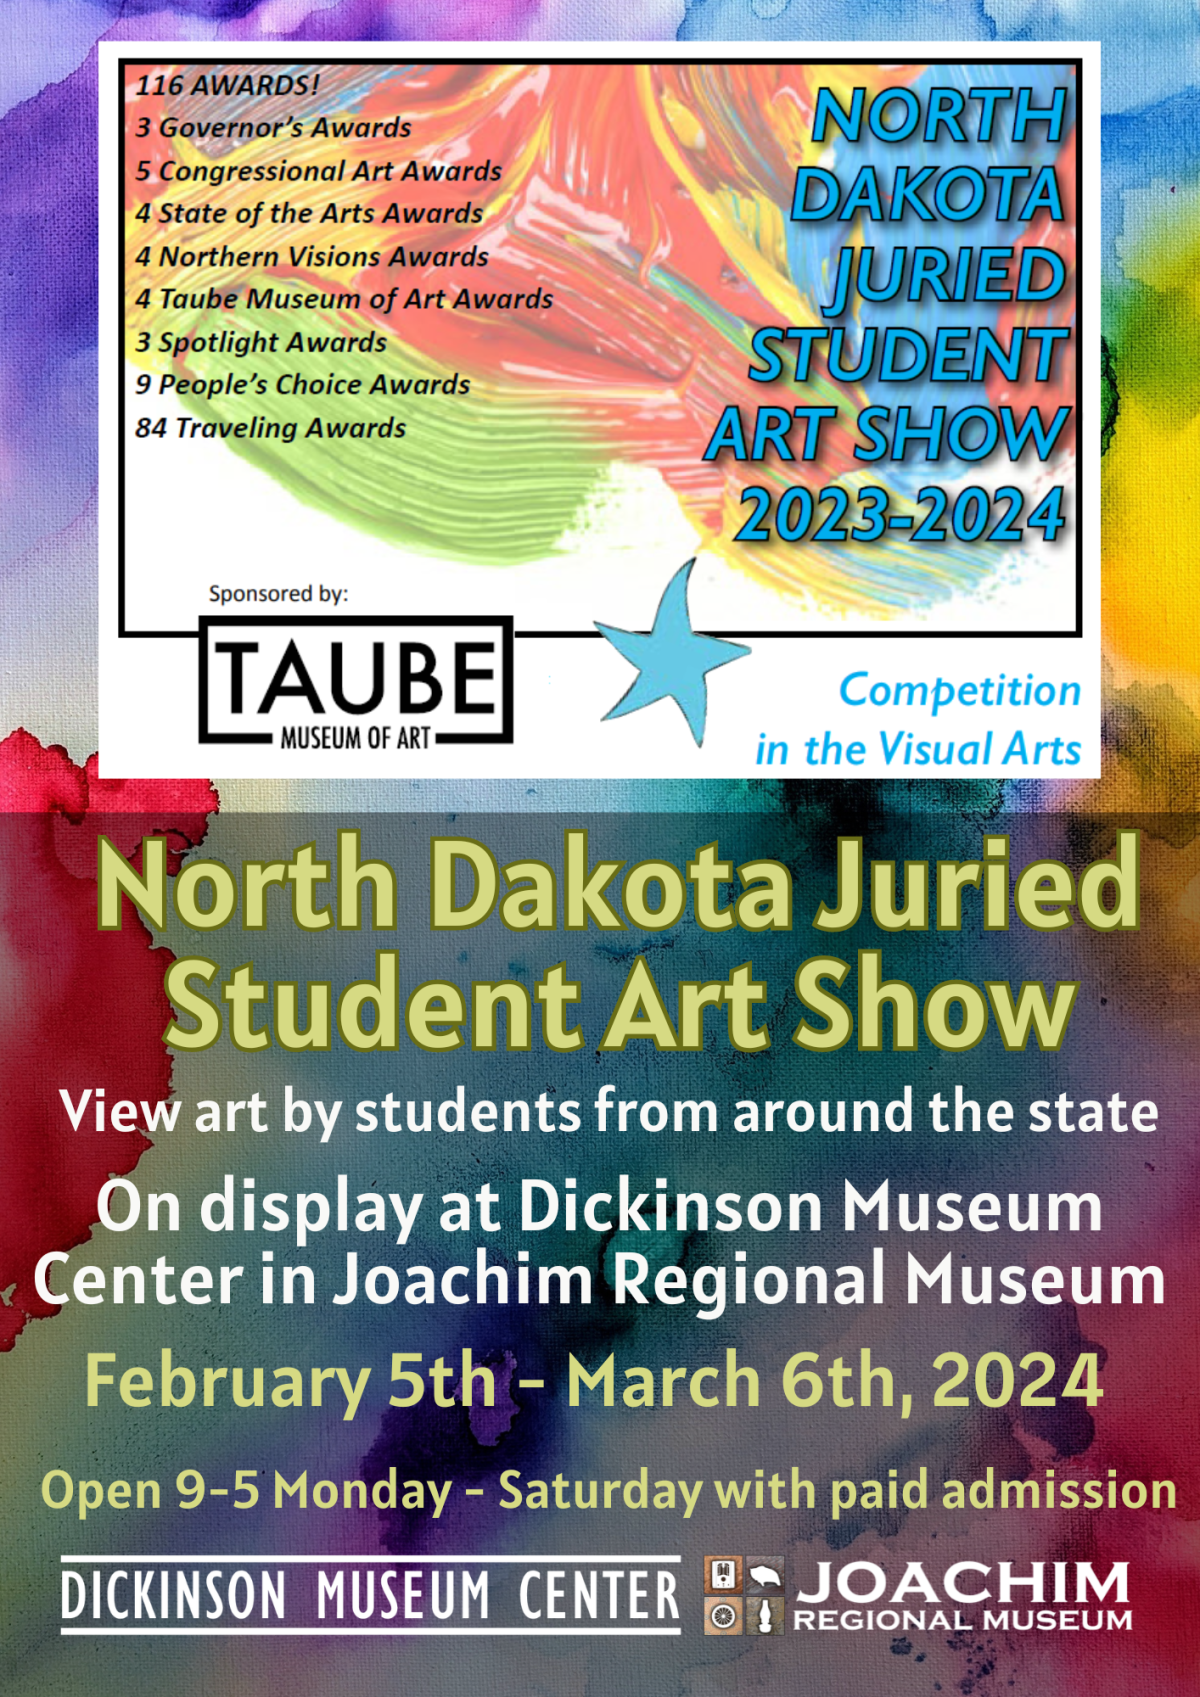 North Dakota Juried Student Art Show 2022-2023 on display February 5th to March 6th 2024